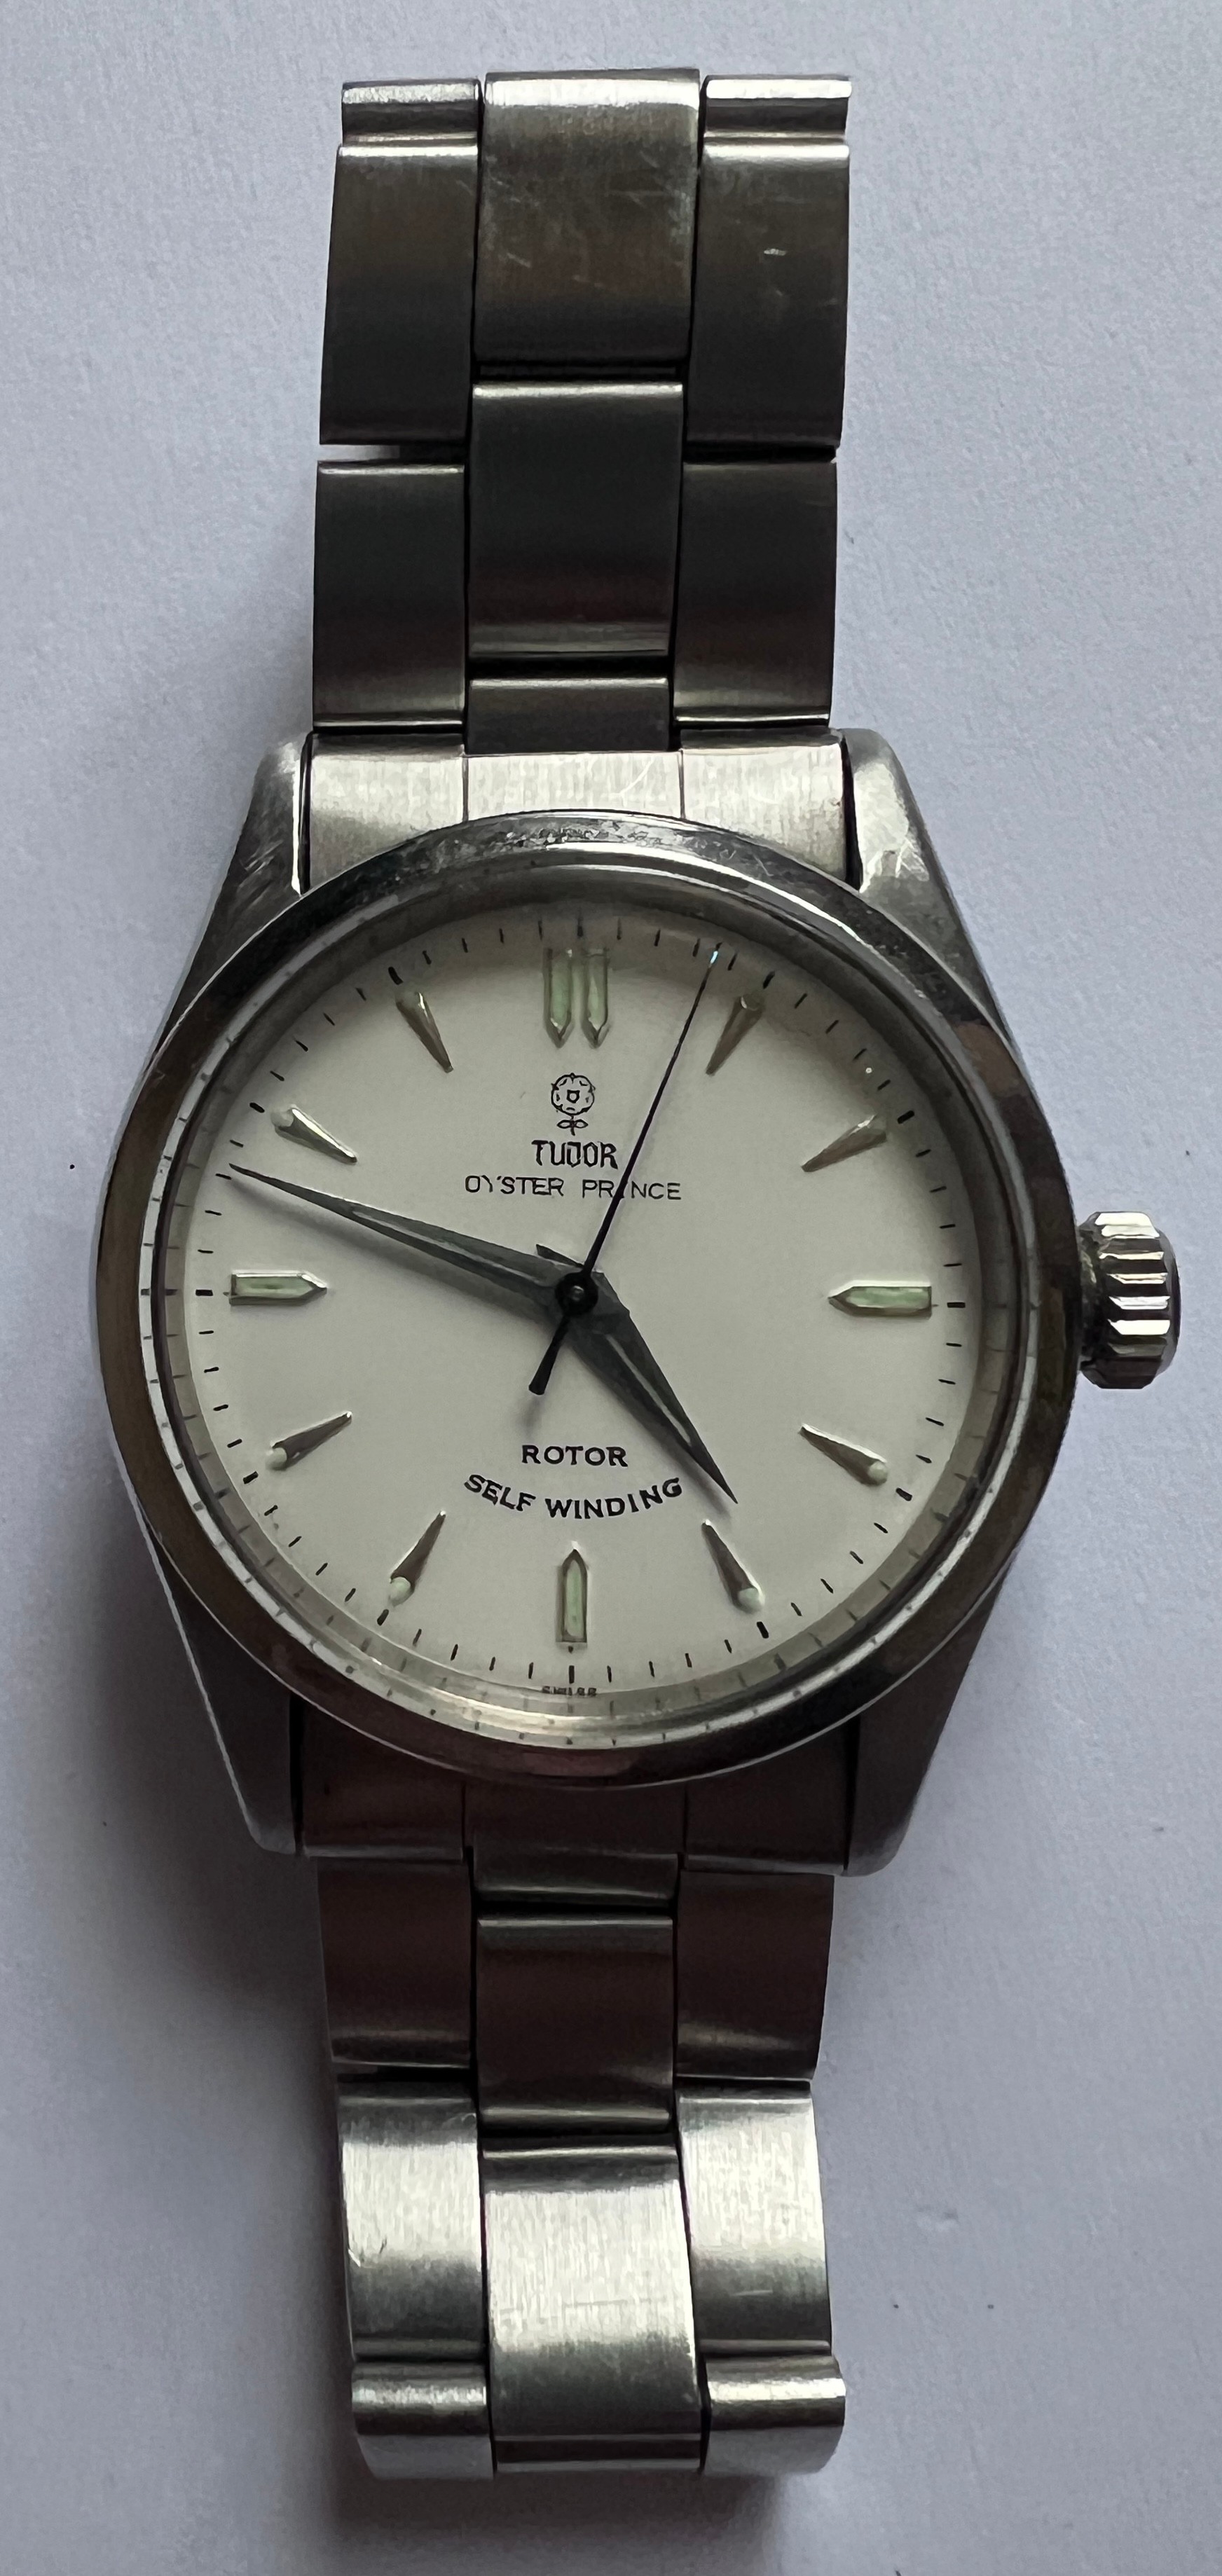 A Tudor Oyster Prince Rotor self winding wristwatch. Rolex crown with stainless steel Tudor strap. - Image 2 of 5